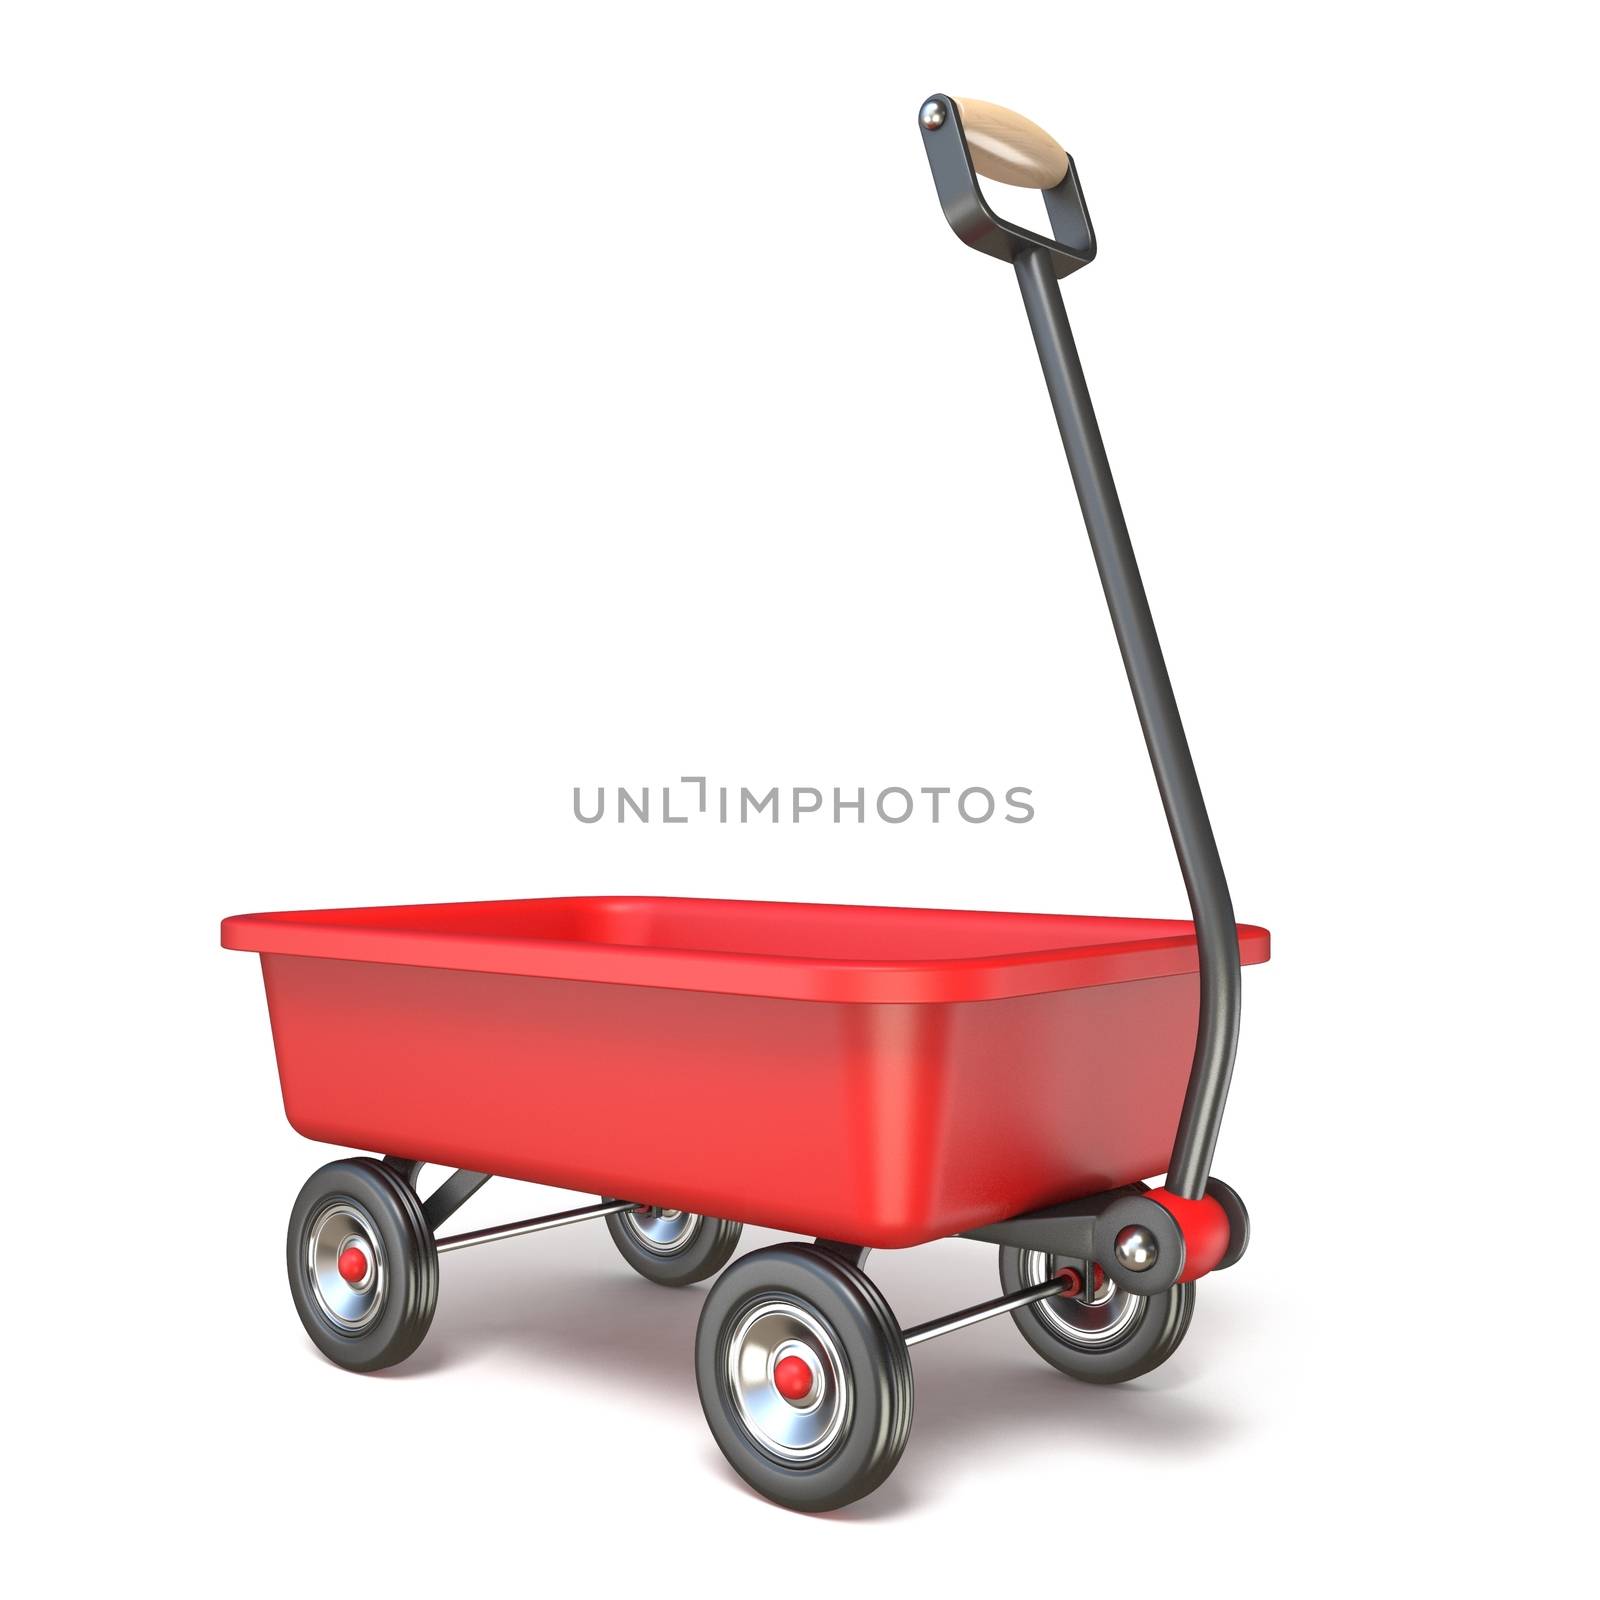 Toy mini wagon perspective view 3D render illustration isolated on white background